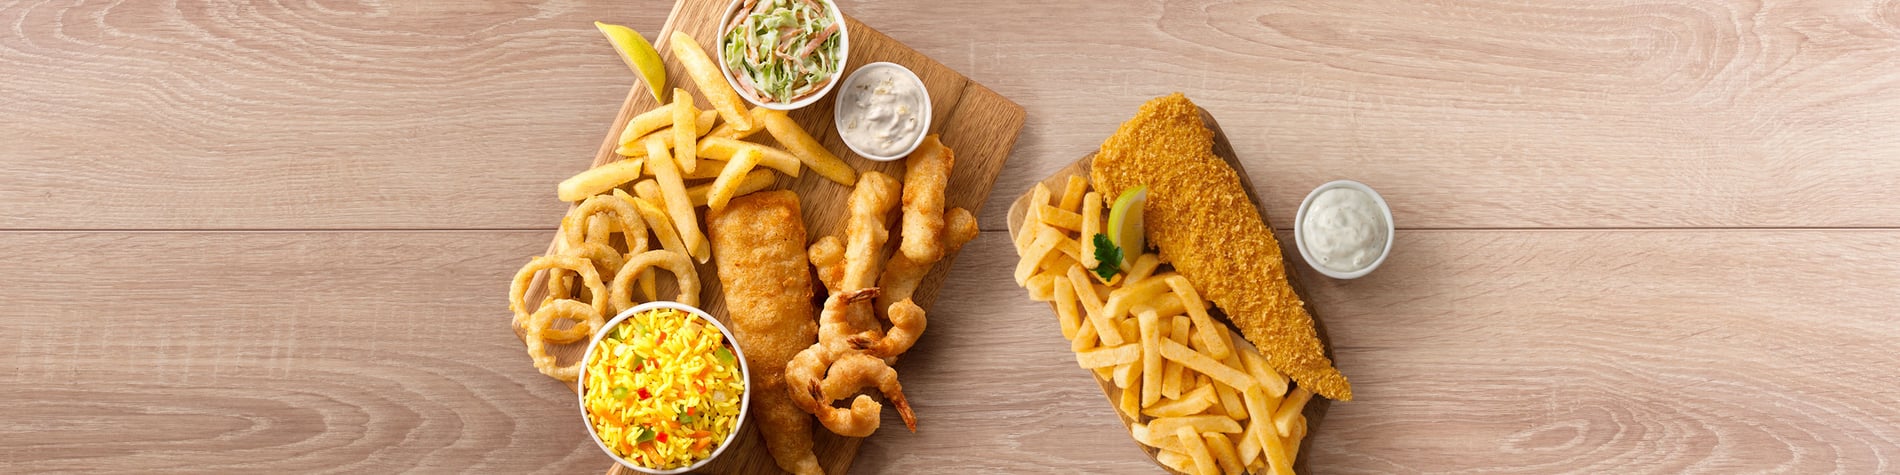 Seafood meals from Fishaways Mall of Africa including a Crunchy Fish and Chips meal and a seafood Platter for One with hake, calamari, prawns, chips, onion rings, and coleslaw.